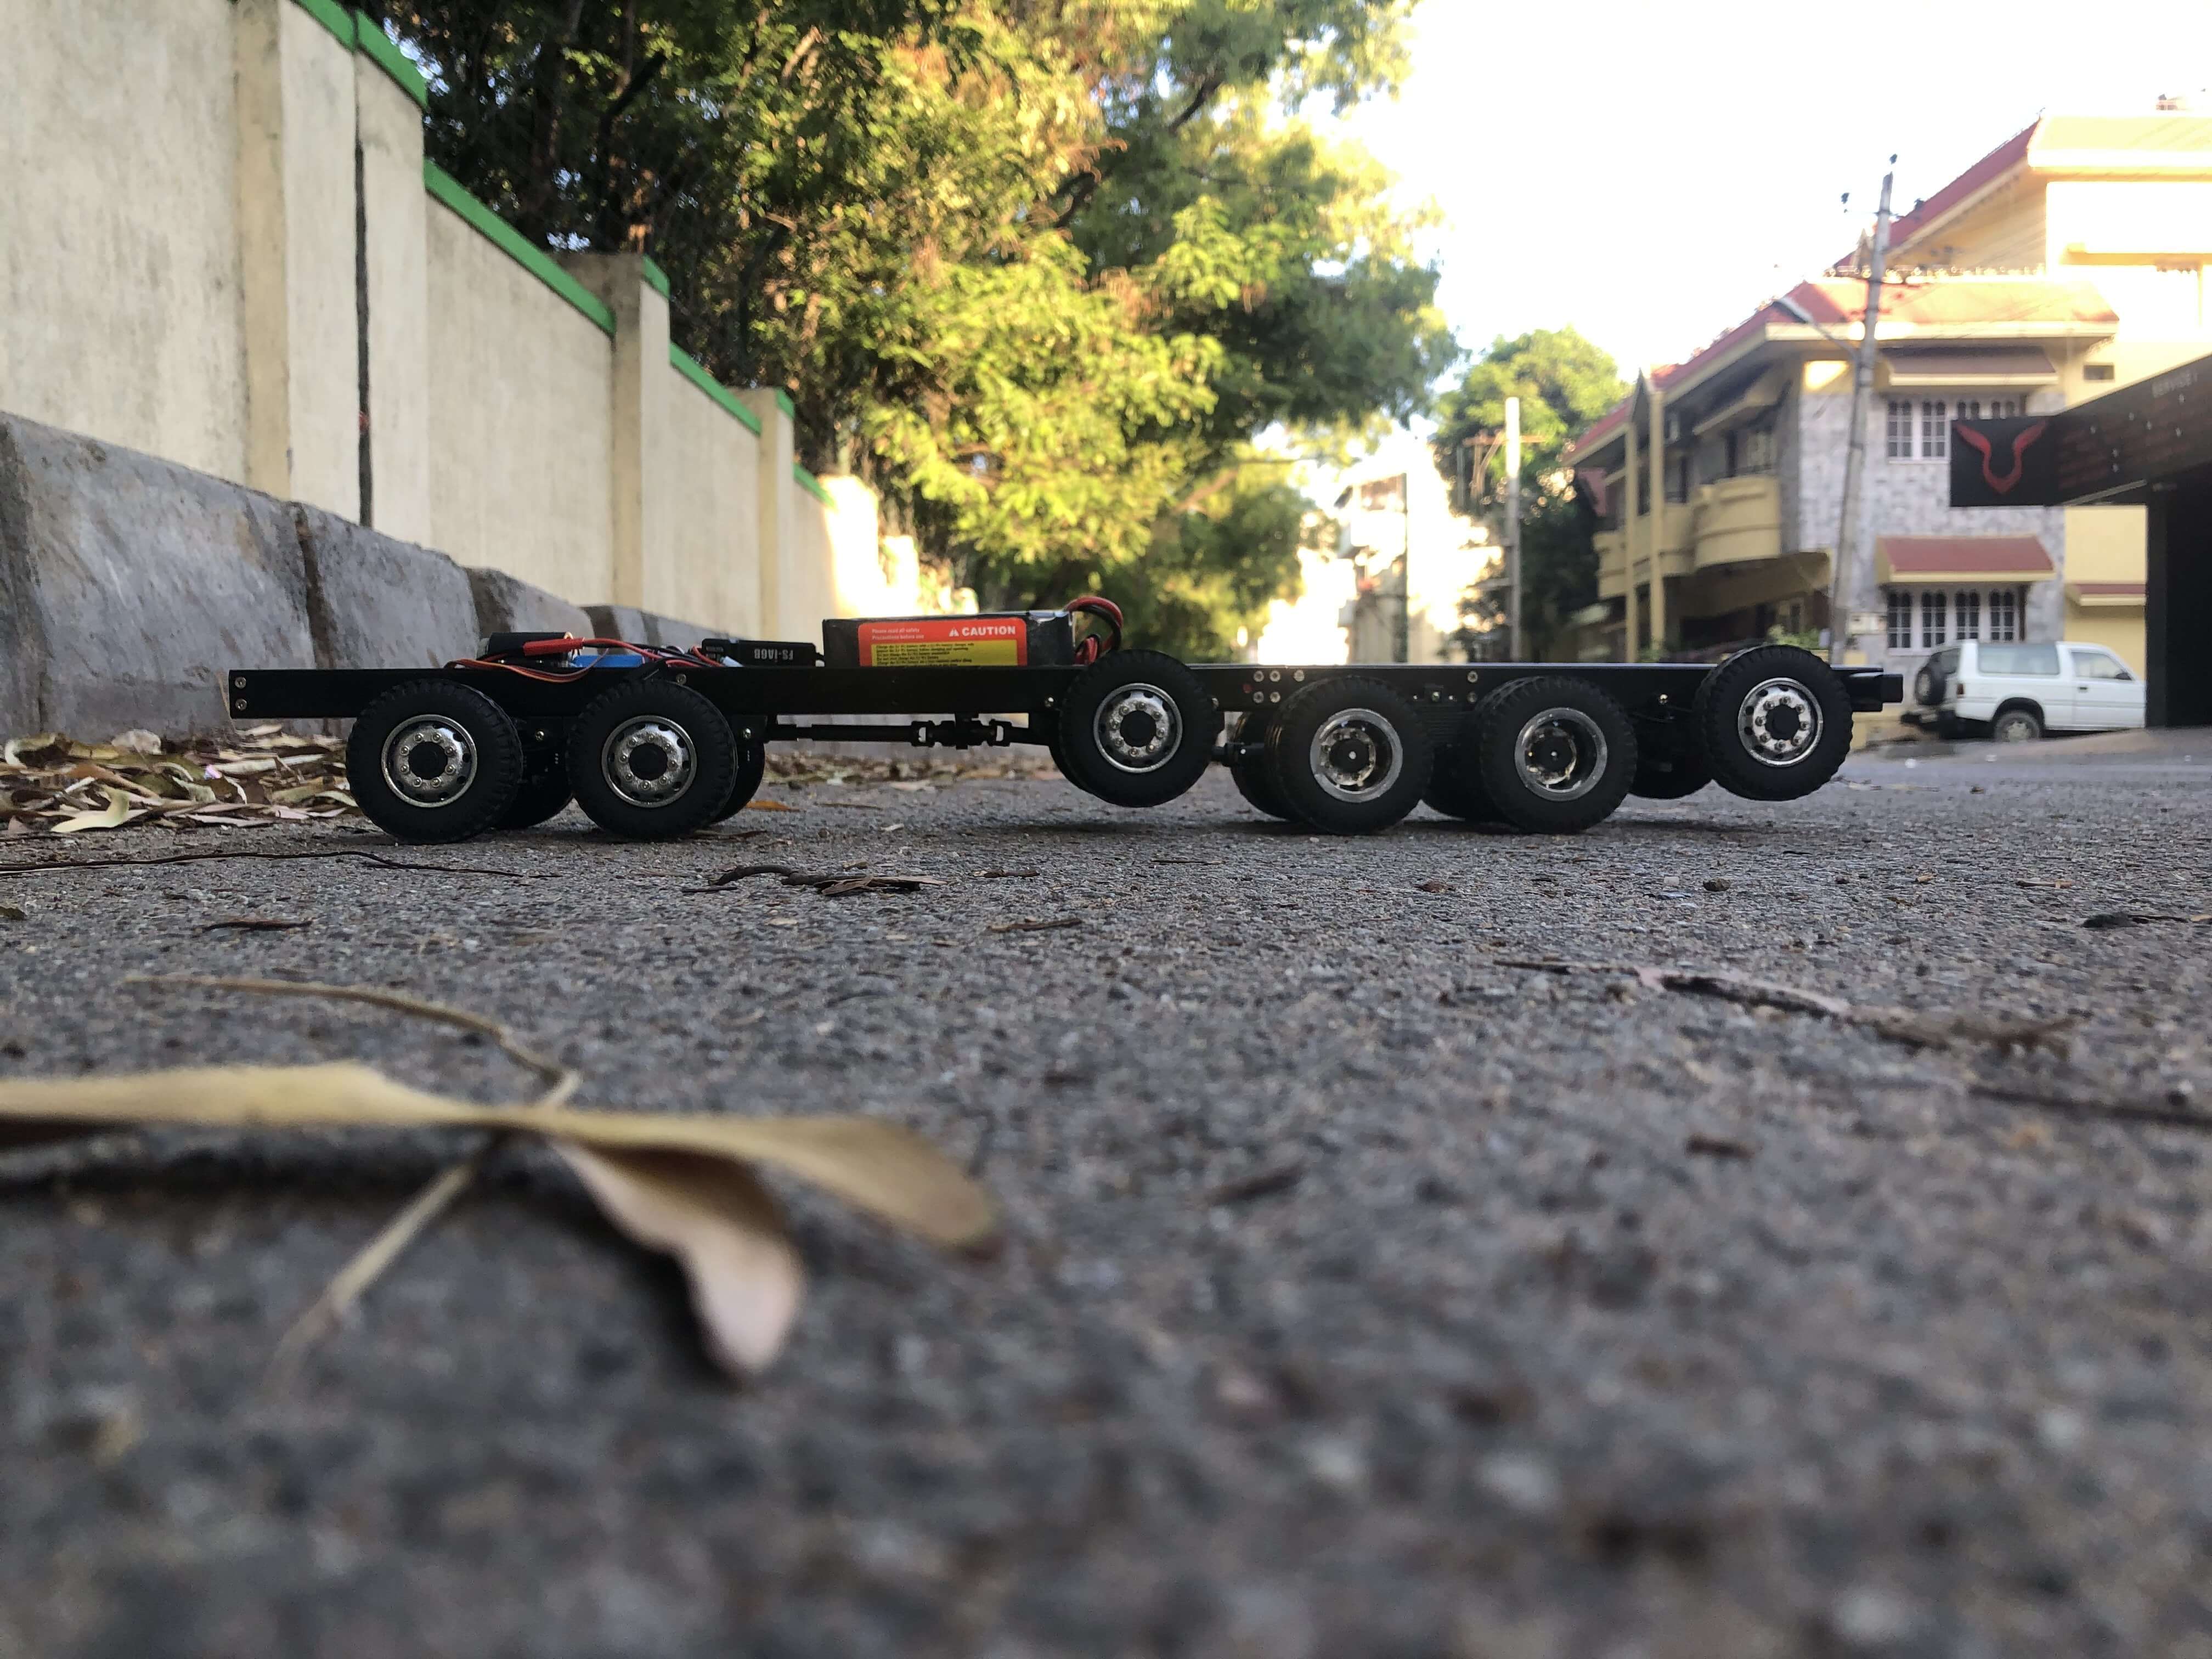 16 Wheel ilft Axle Chassis with Motor-Gearbox and Steering Servo (Rear Multiaxle Drive) (Scale 1:18)